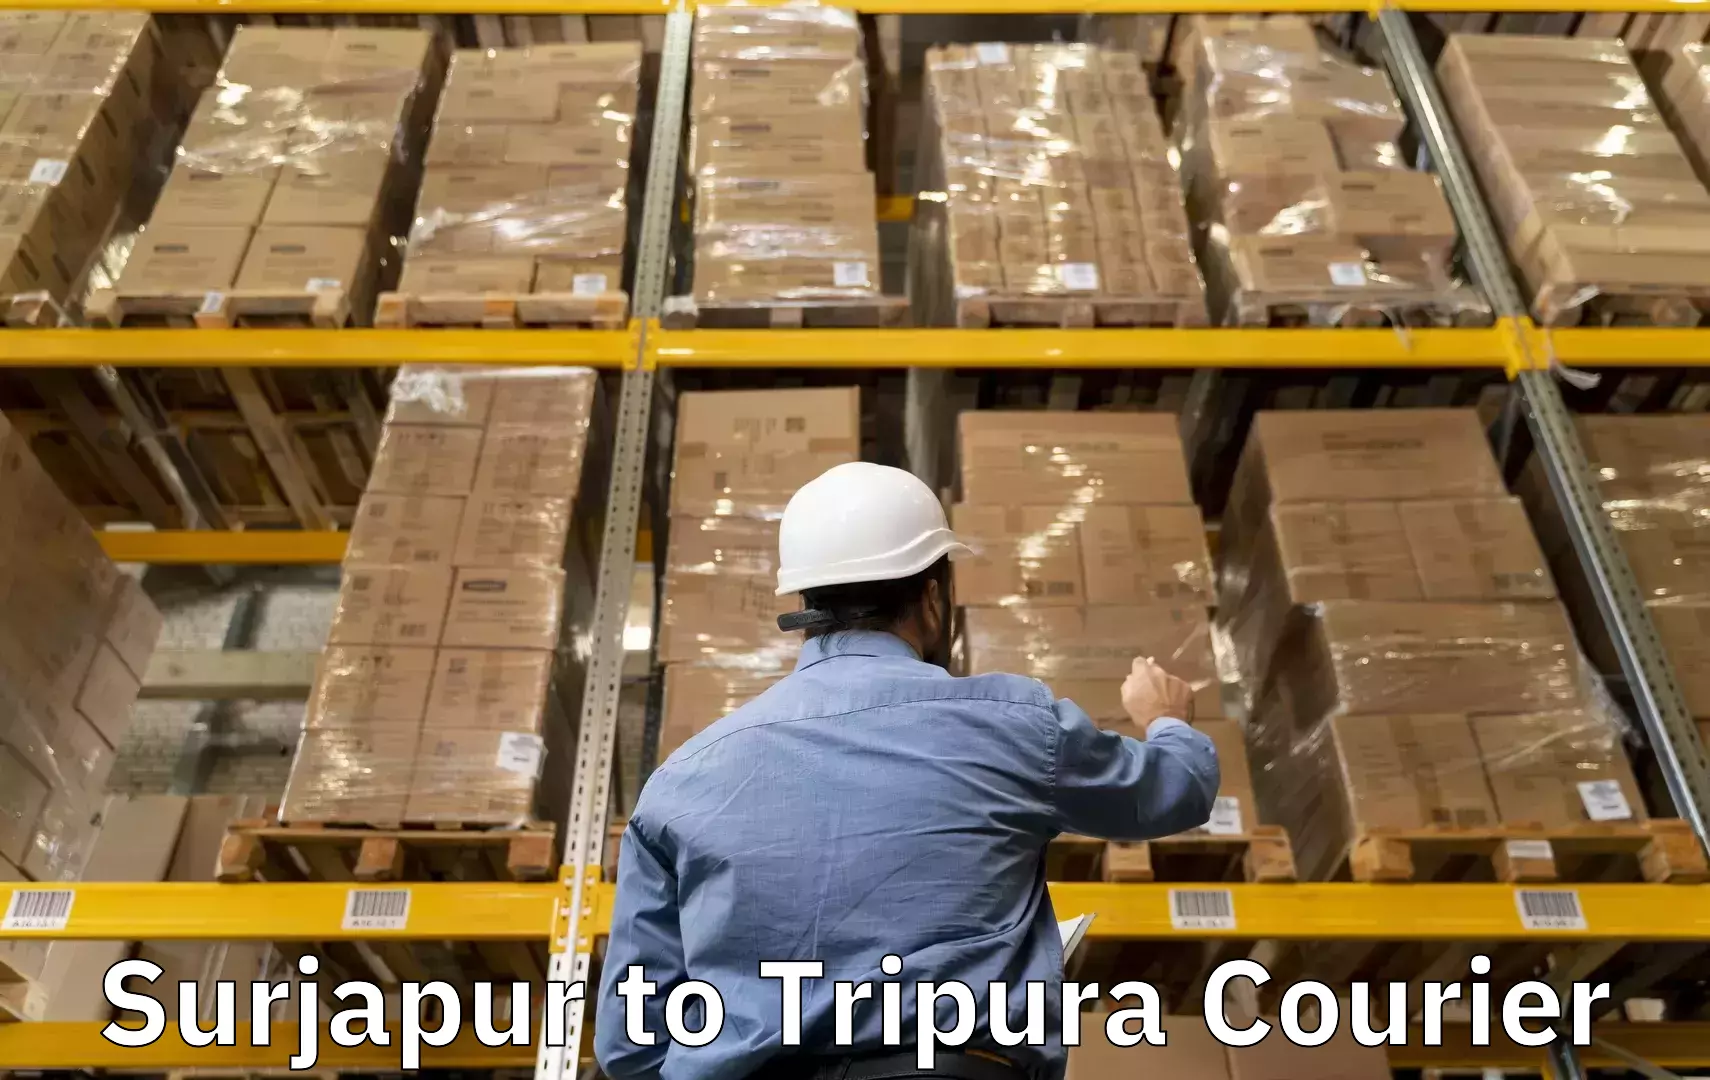 Luggage delivery rates Surjapur to Udaipur Tripura